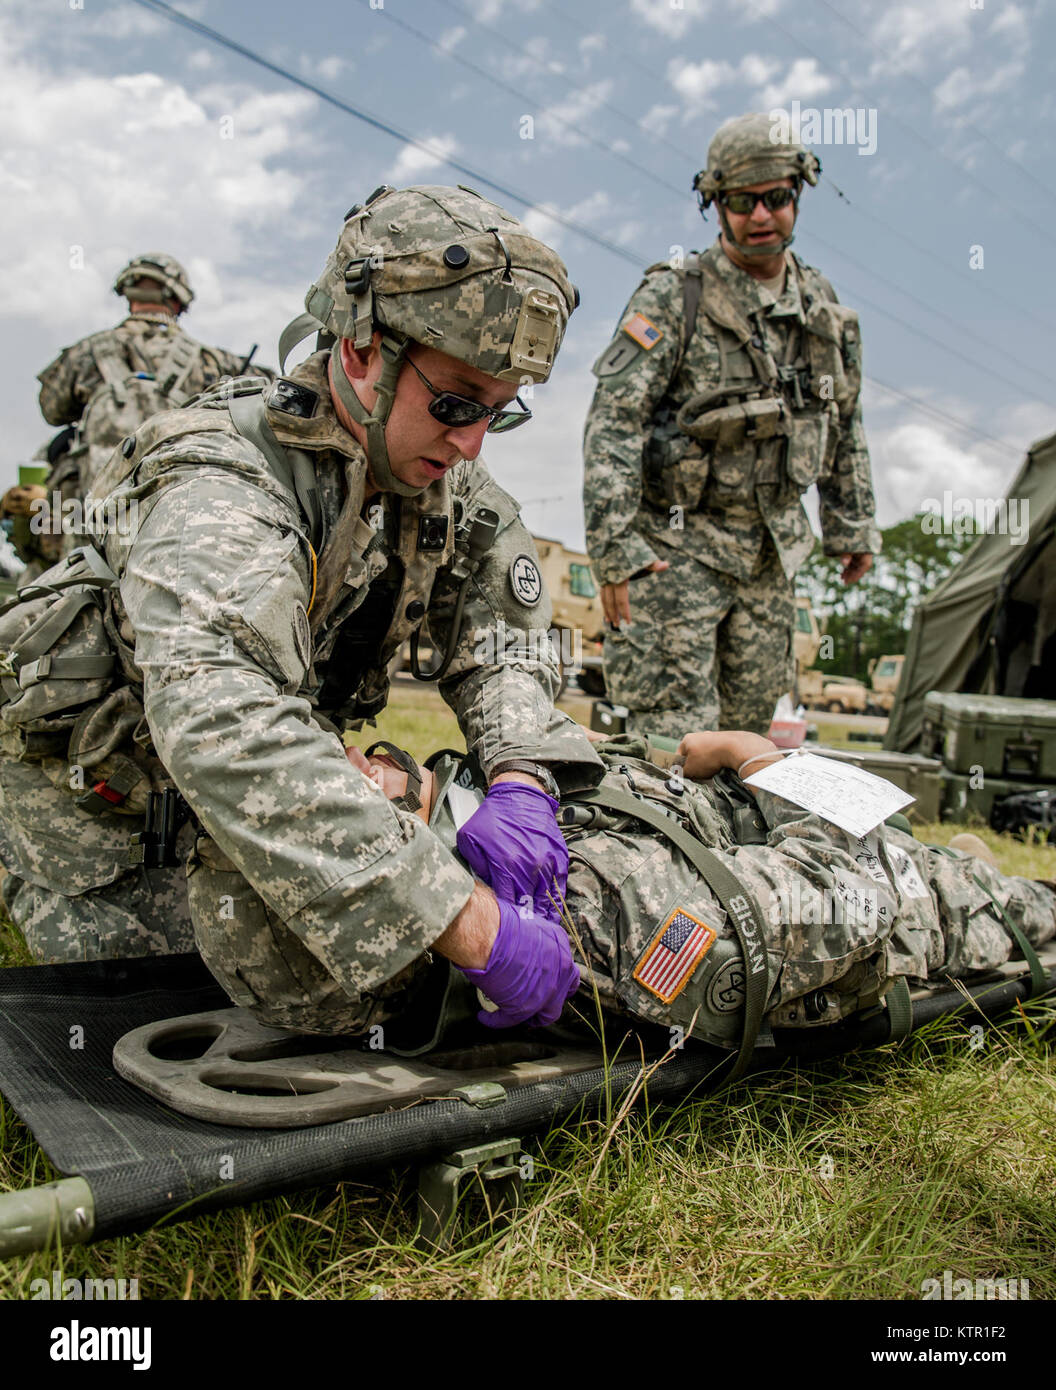 New York Army National Guard medics, assigned to Headquarters Co., 1st Battalion, 69th Infantry support a Soldier with a simulated back injury during a mass casualty exercise at the Army’s Joint Readiness Training Center, Fort Polk, La., Saturday, July 16, 2016. More than 3,000 New York Army National Guard Soldiers deployed for a three week exercise at the Army’s Joint Readiness Training Center, July 9-30, 2016. U.S. Army National Guard photo by Sgt. Harley Jelis. Stock Photo